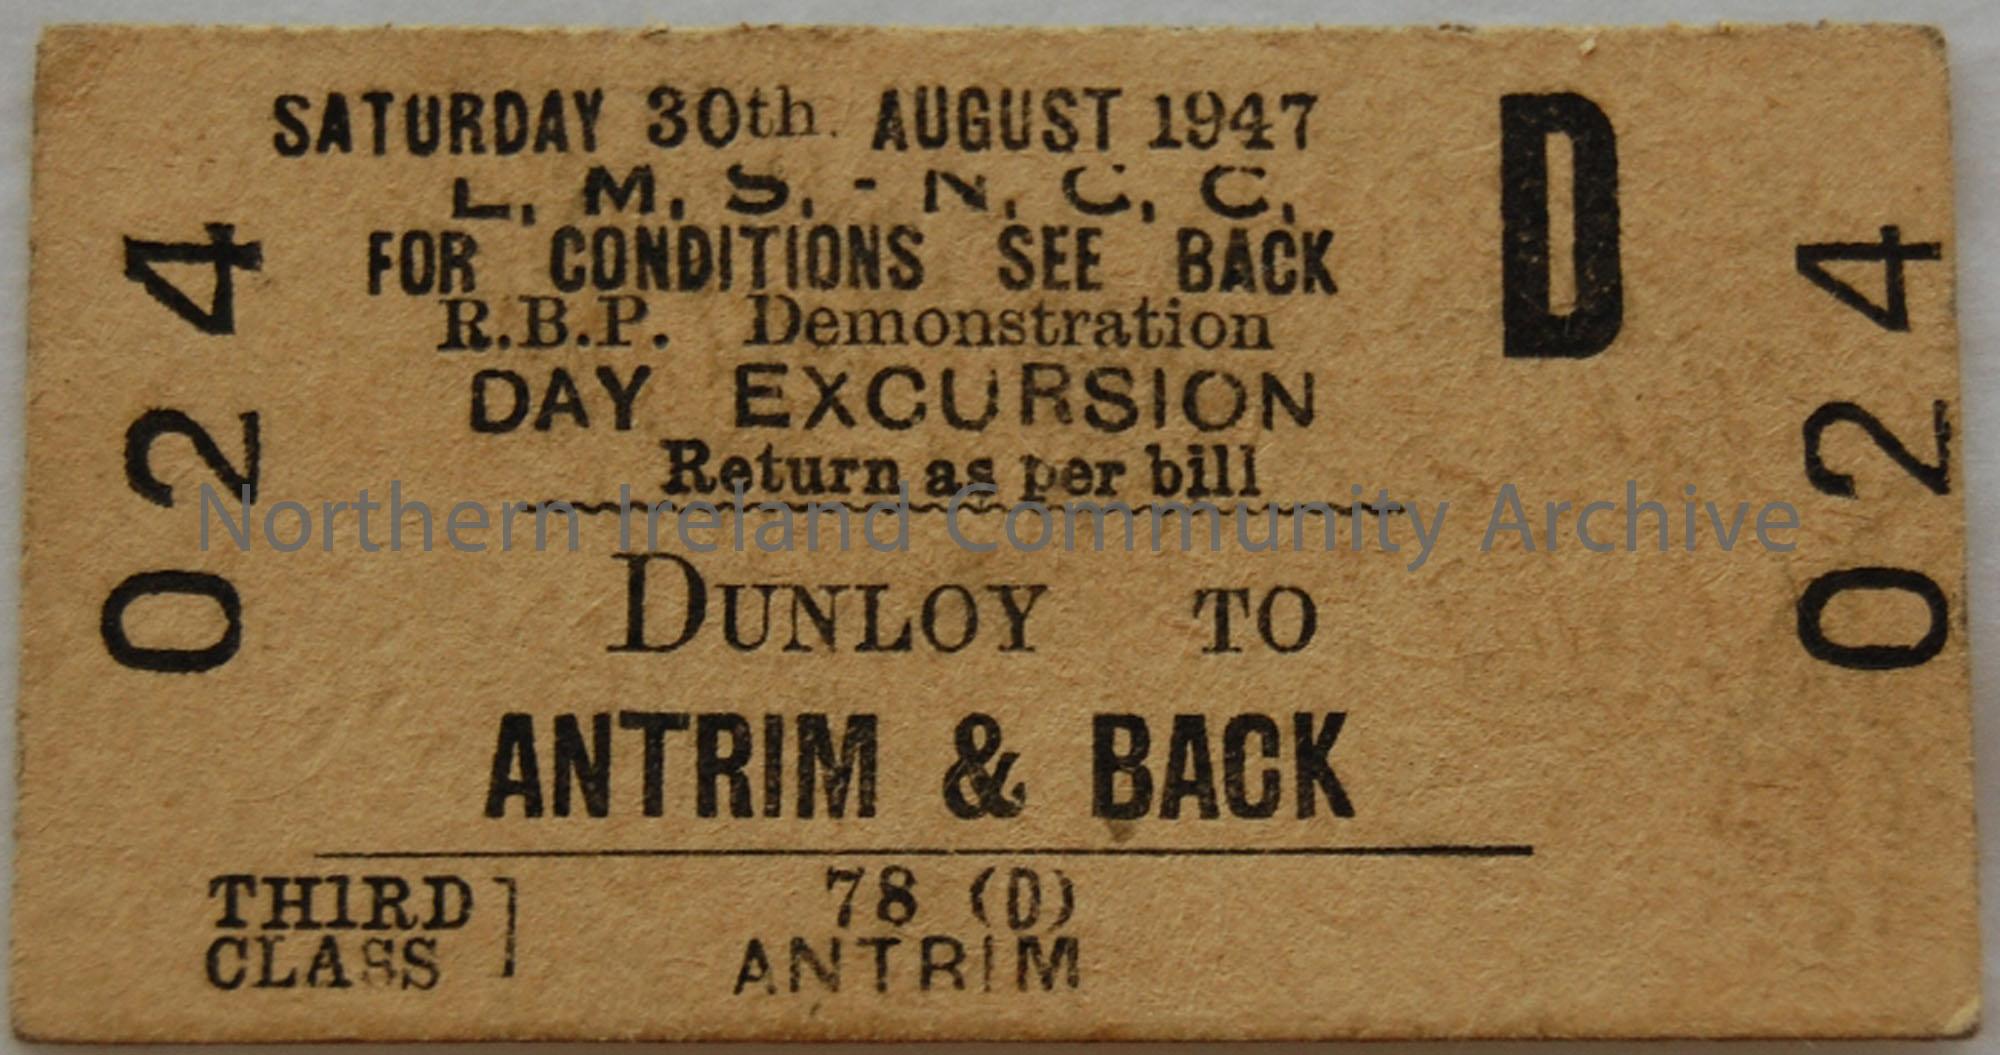 ticket issued by LMS. NCC. Third class day excursion ticket to Royal Black Preceptory Demonstration on Saturday 30th August, 1947